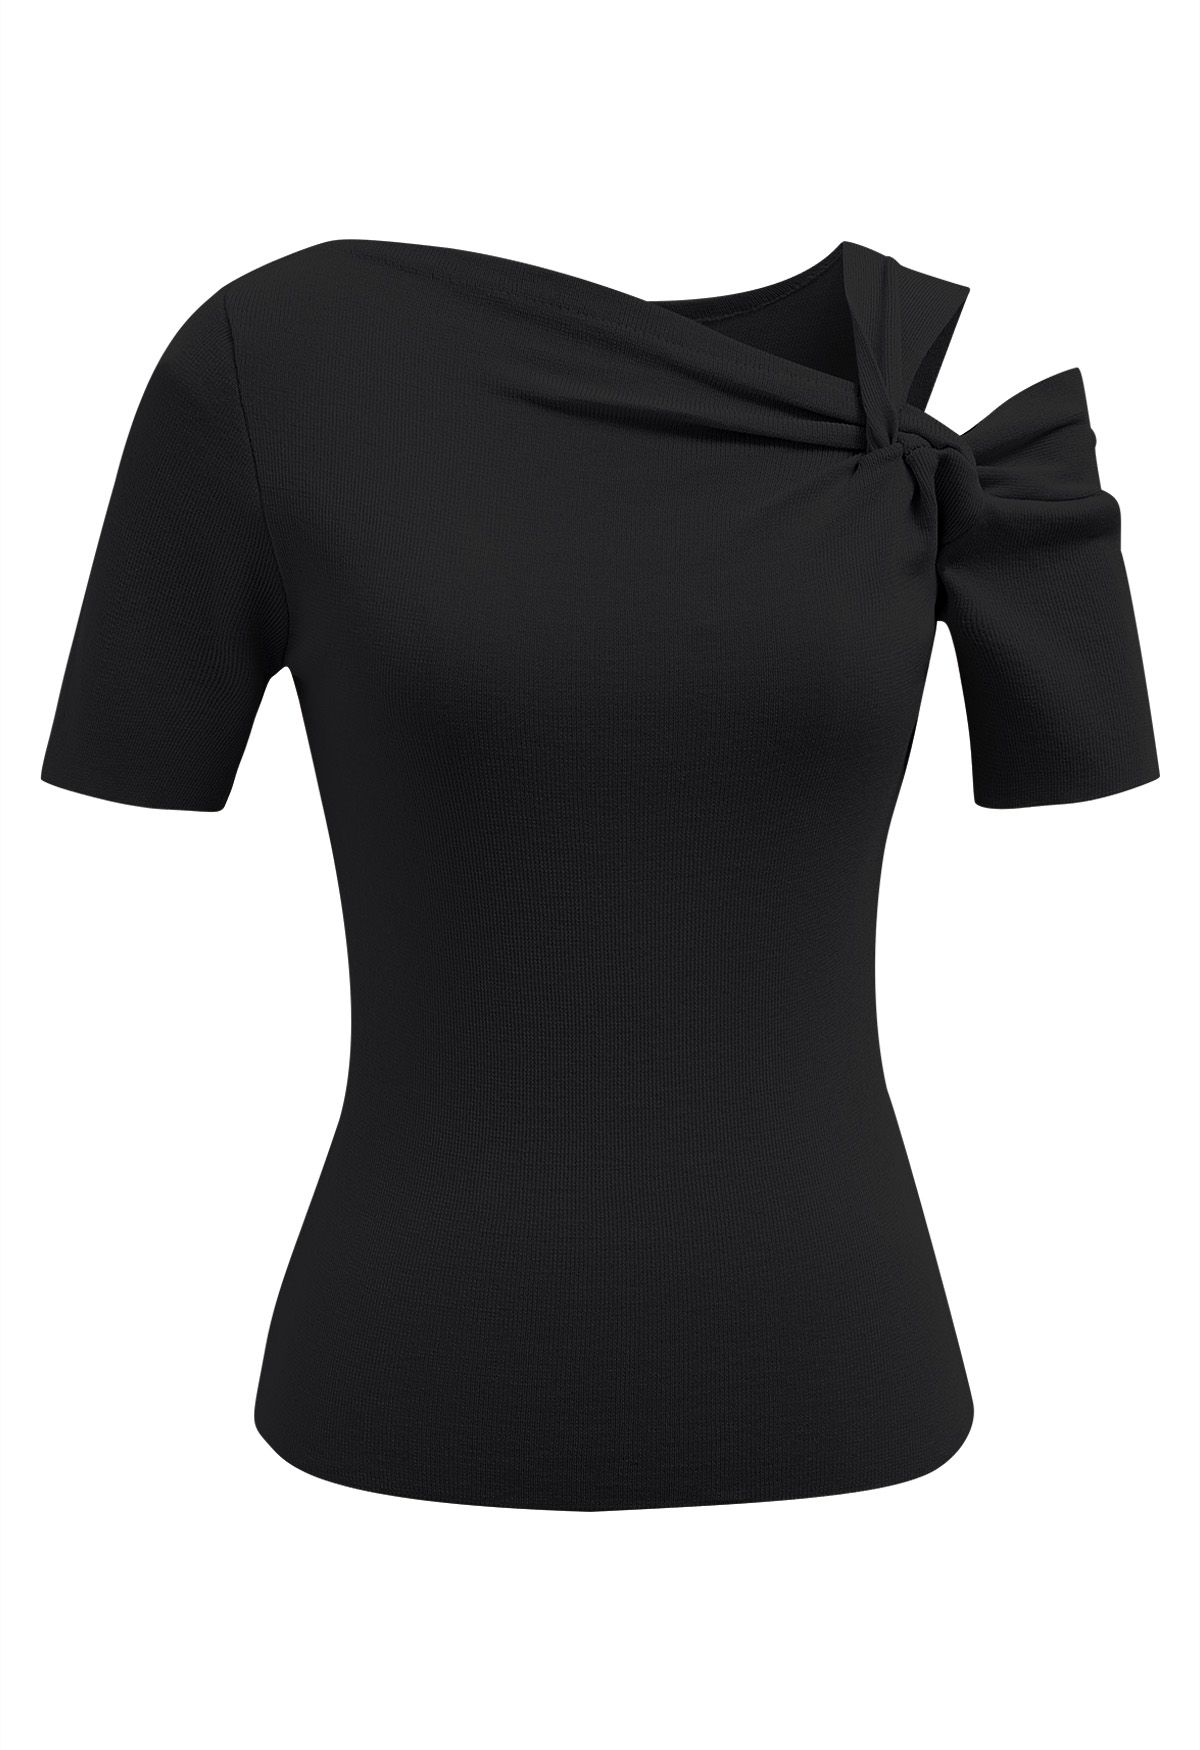 Stylish Knotted Shoulder Stretchy Knit Top in Black